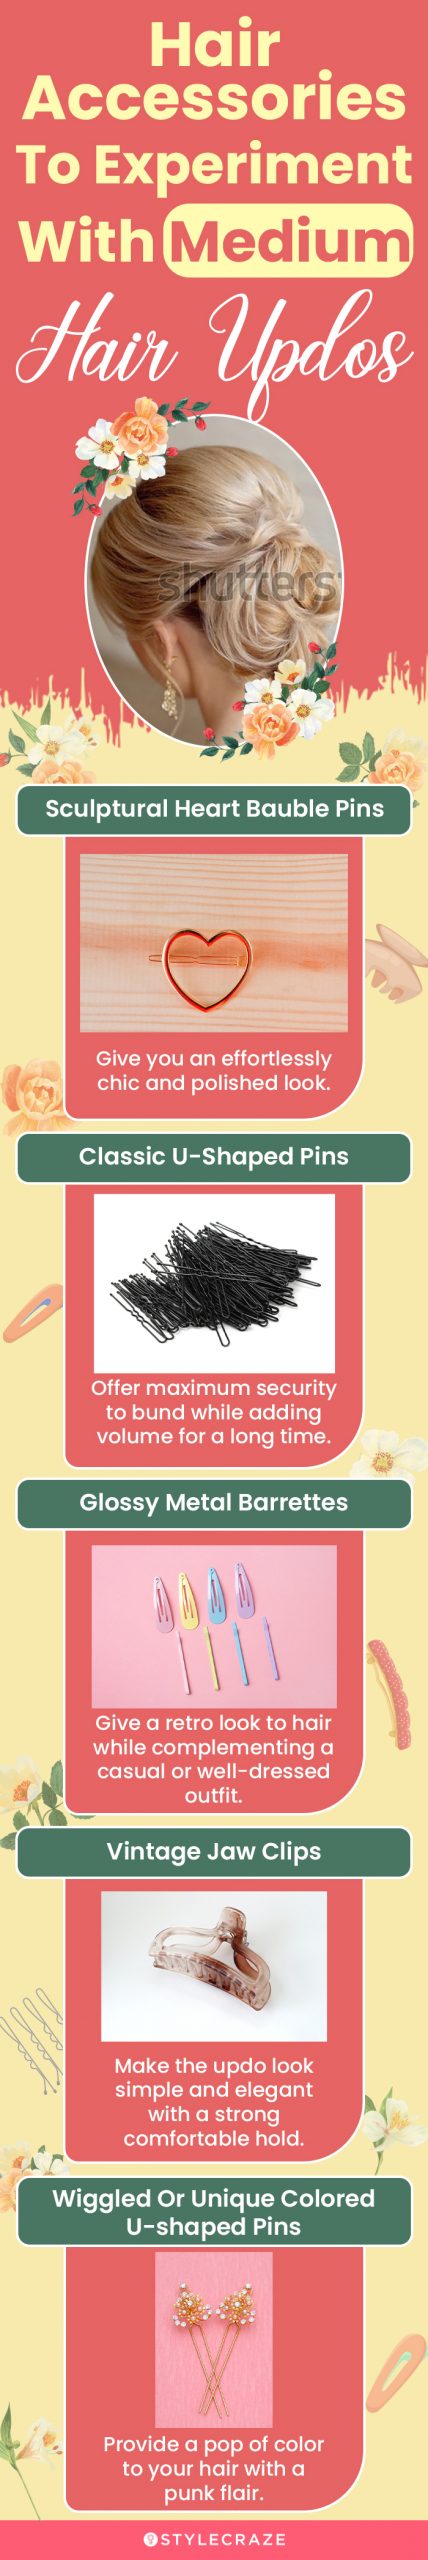 hair accessories to experiment with medium hair updos [infographic]